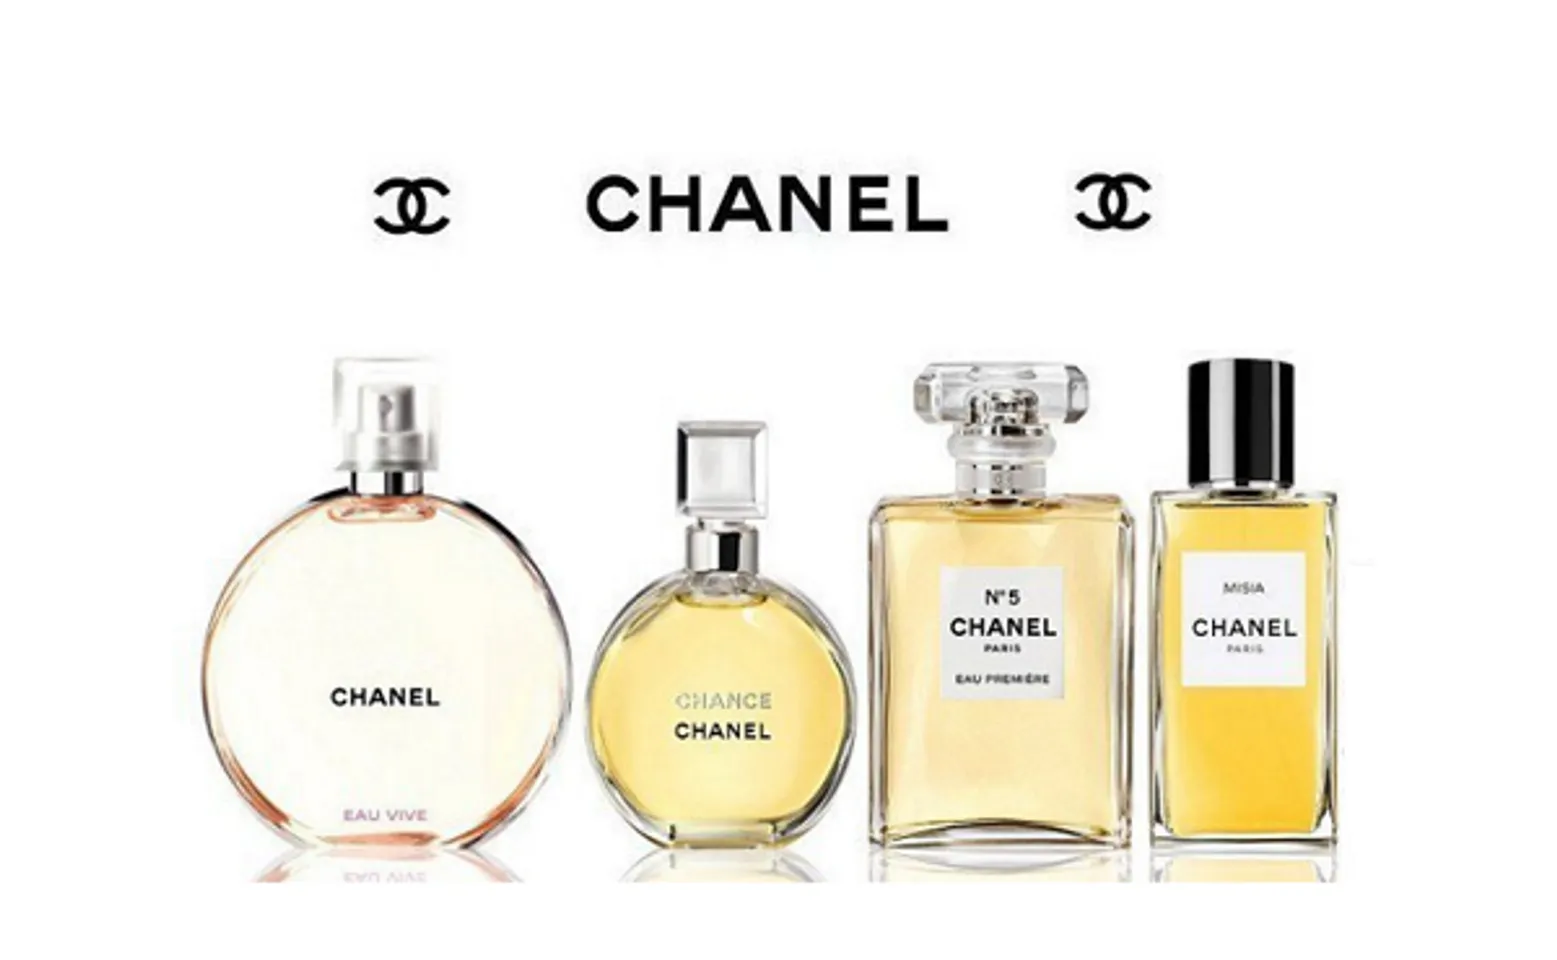 CHANEL GABRIELLE CHANEL Body Lotion Set  Bloomingdales